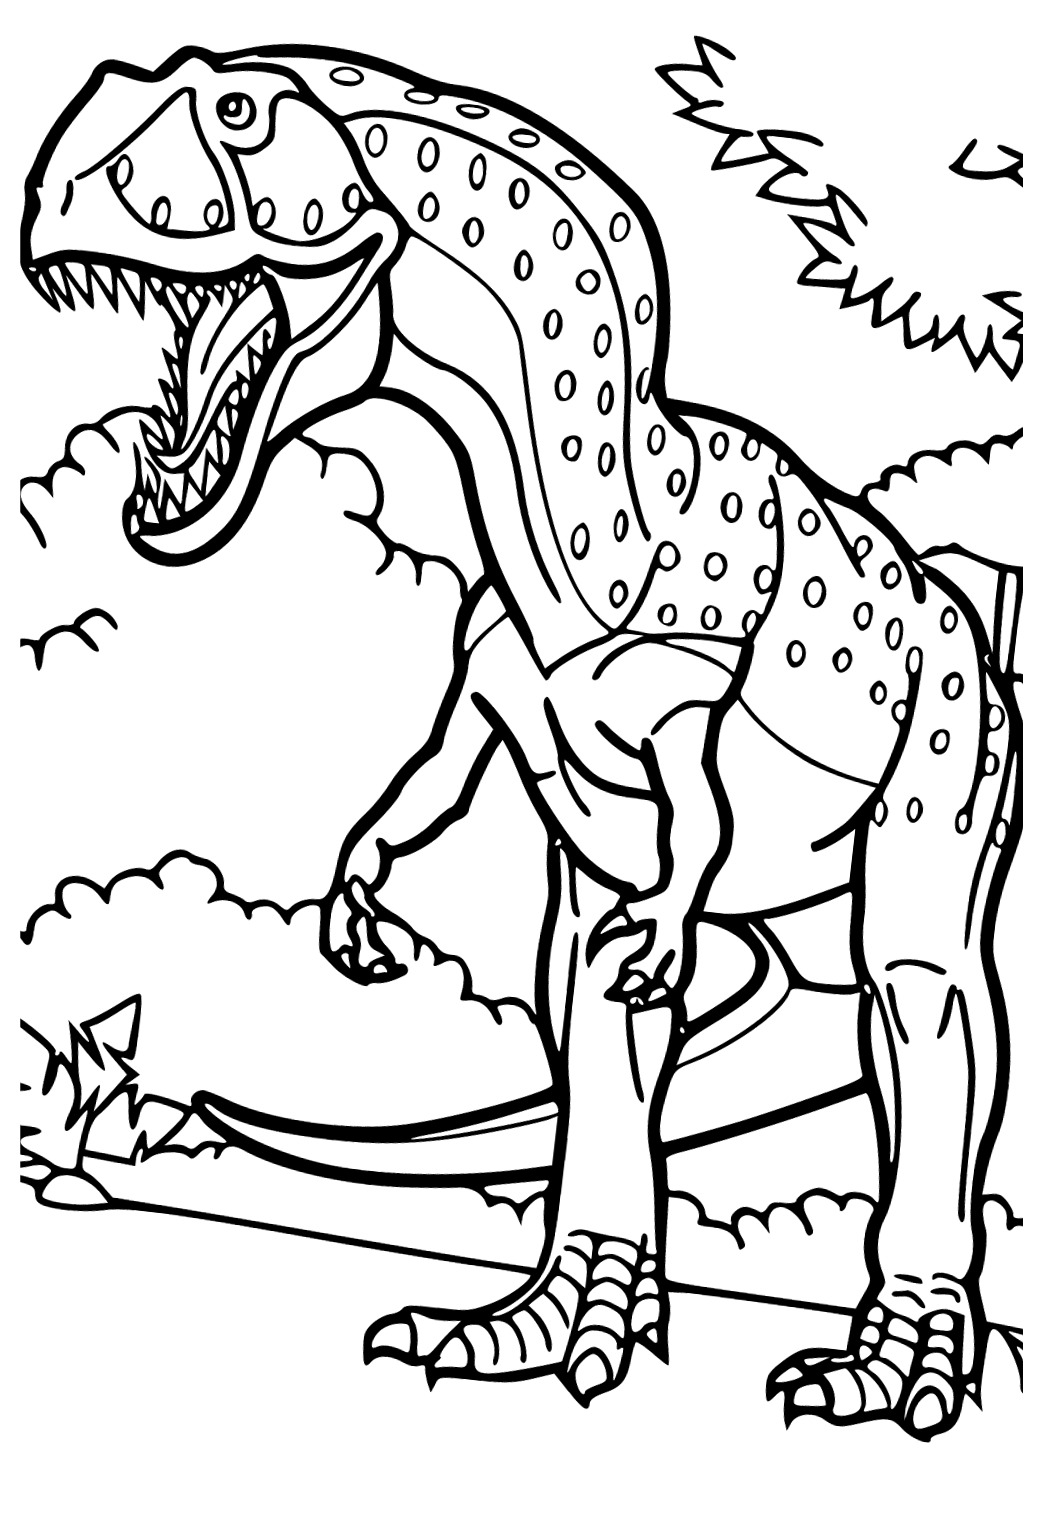 Free Printable Giganotosaurus Forest Coloring Page for Adults and Kids ...